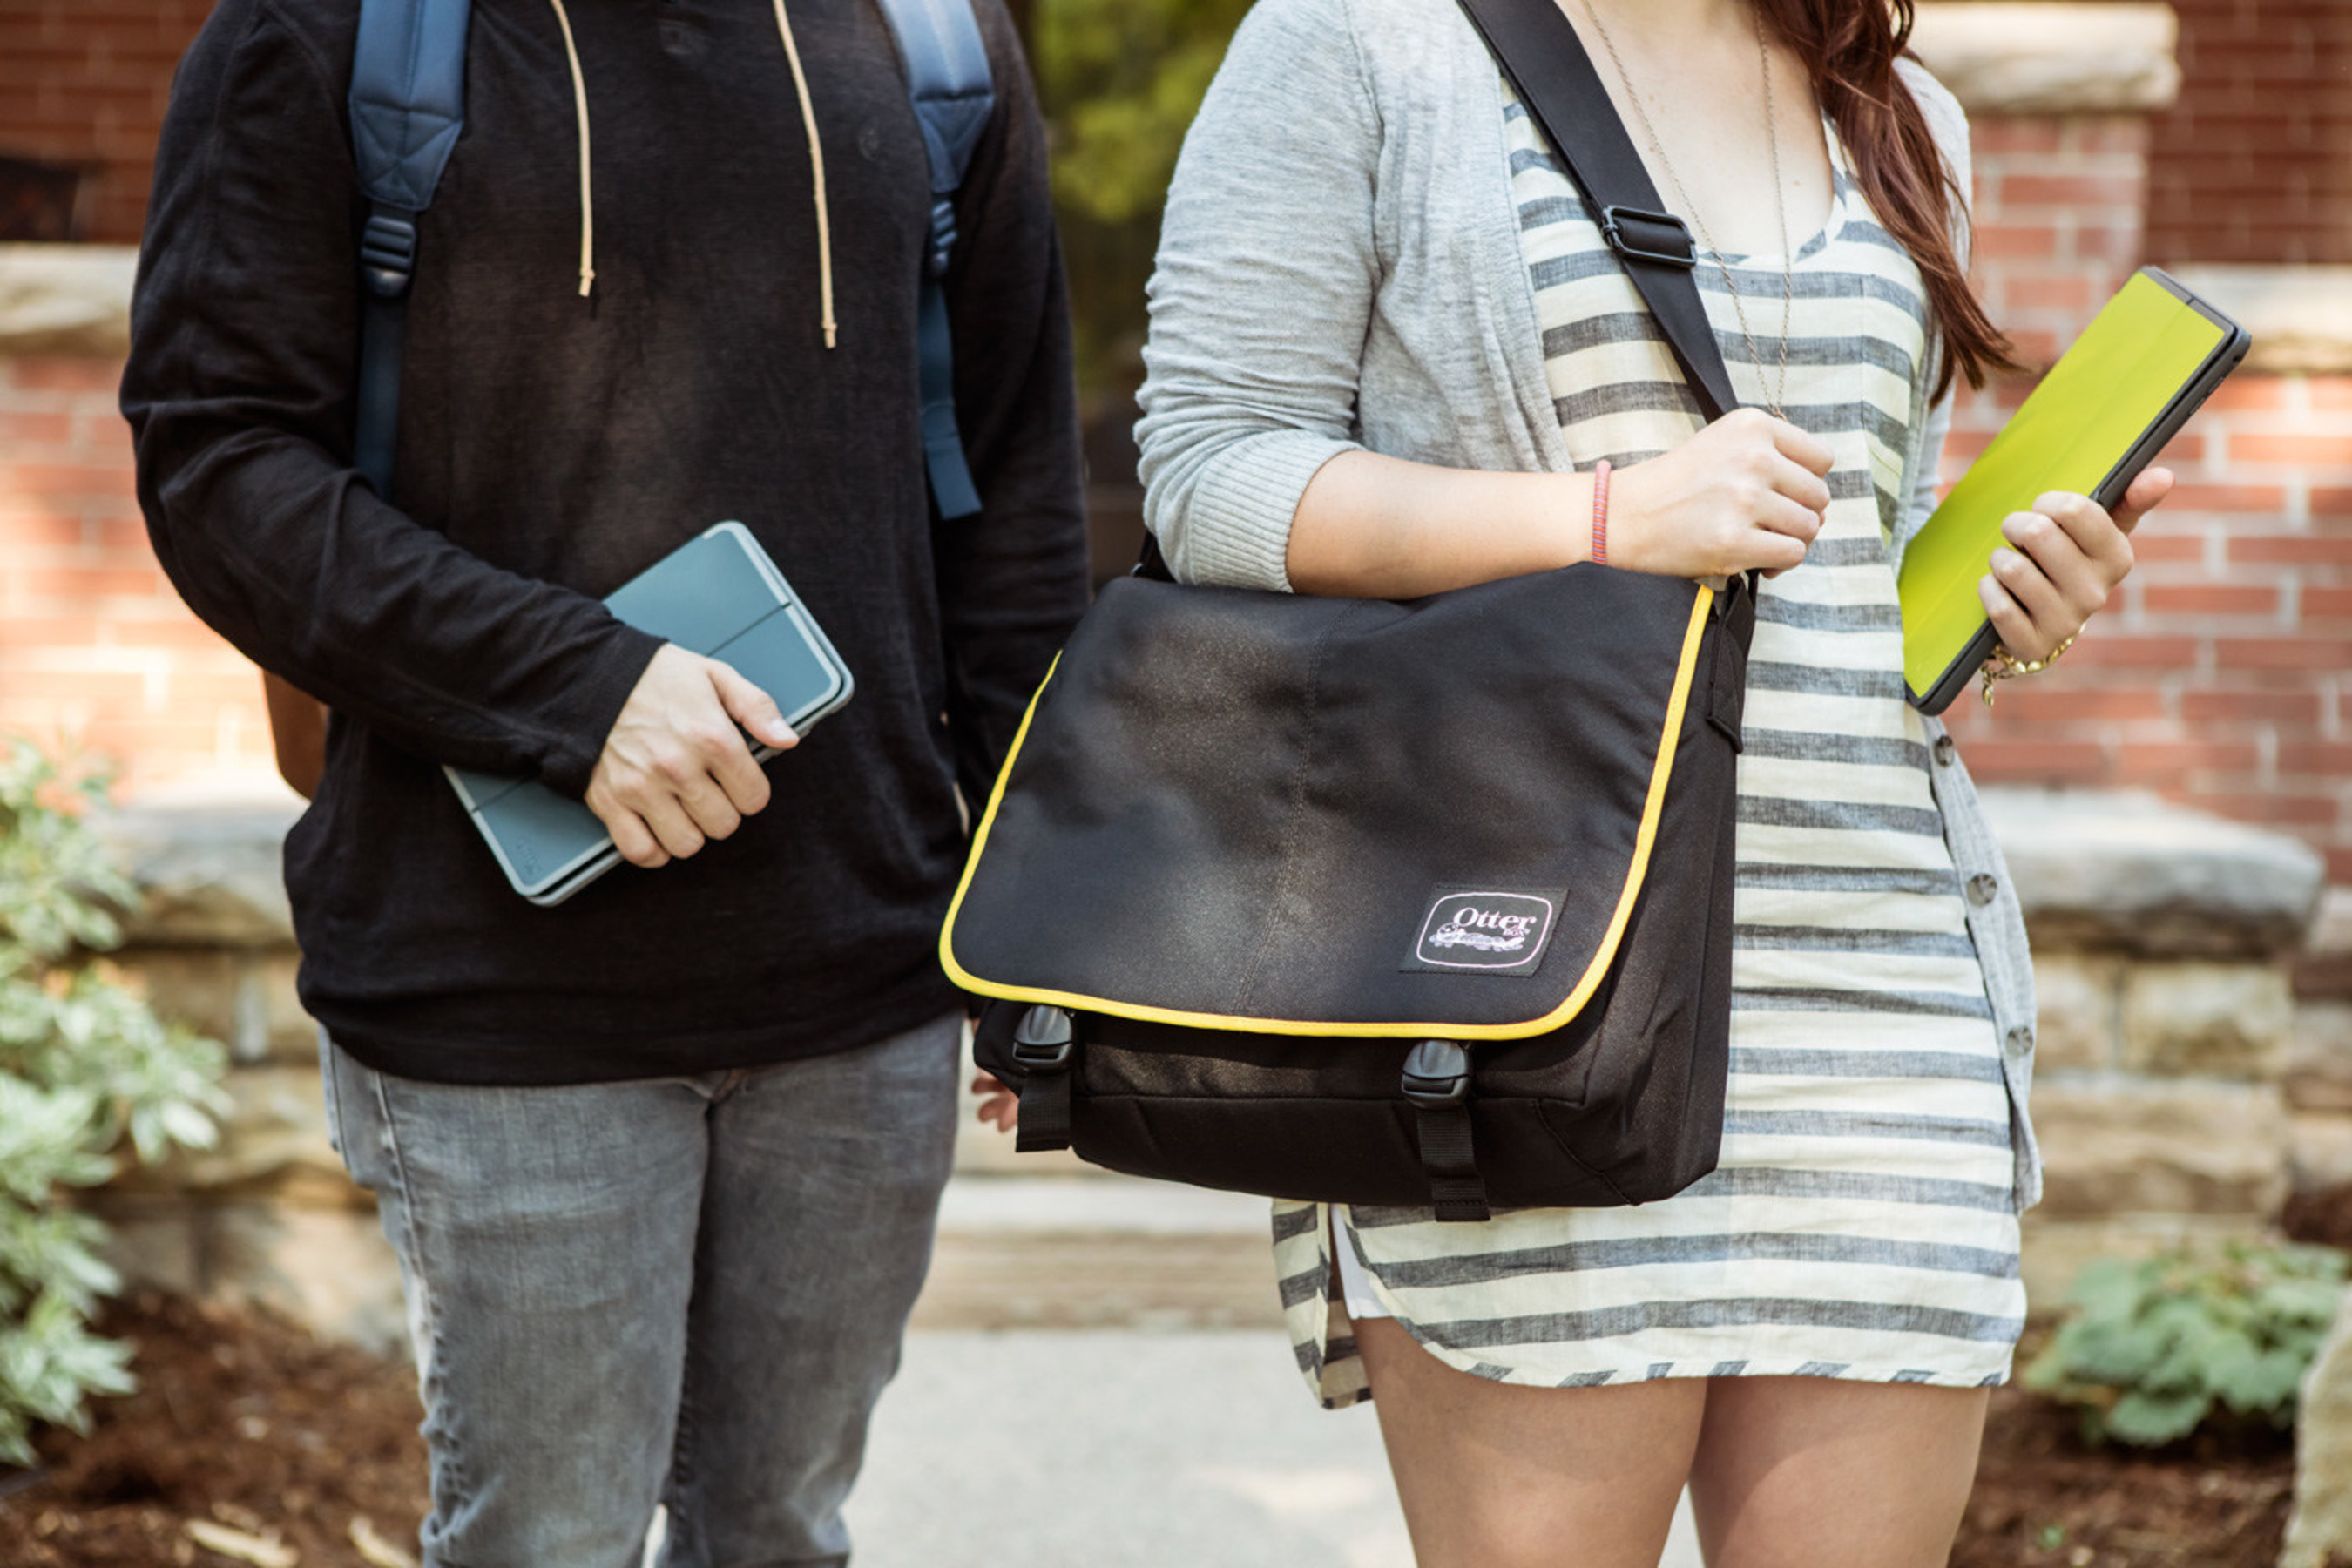 OtterBox has the back to school essentials you need to keep tech safe from drops, bumps, scratches and hallway havoc. Check out the Messenger Bag, uniVERSE Case System and Profile Series.